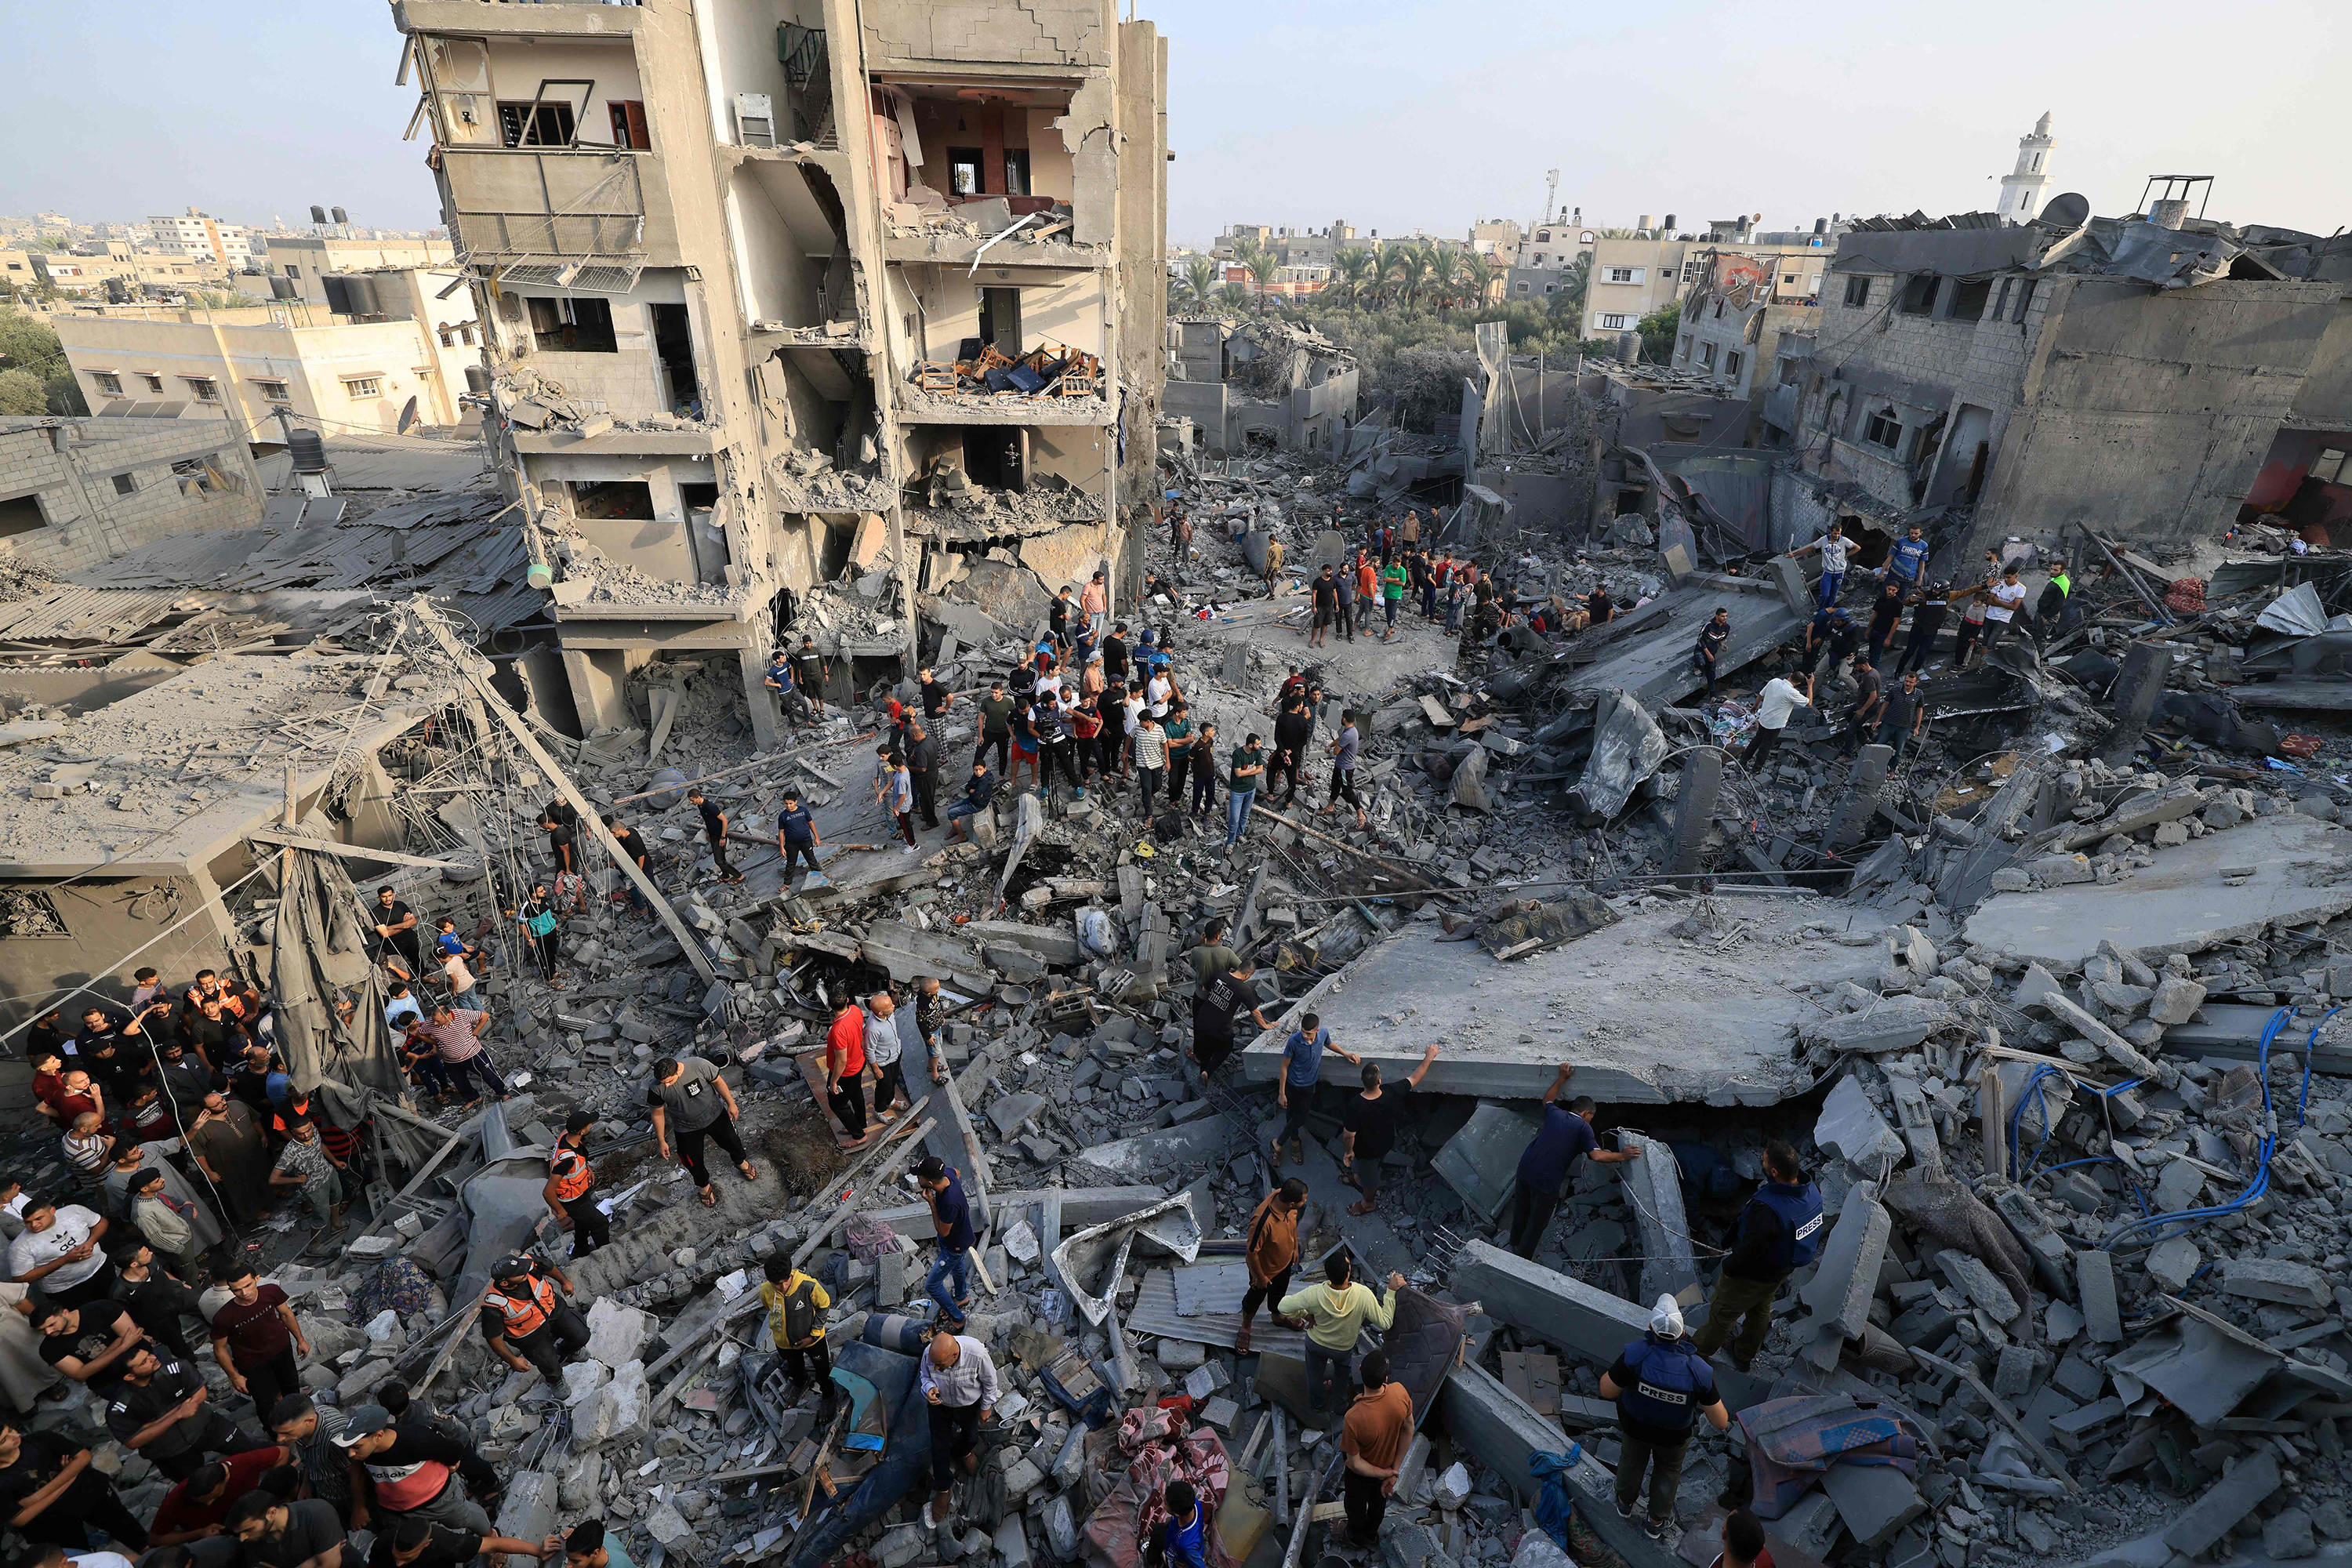 People check the damage at the Al-Maghazi refugee camp in Deir Balah in the central Gaza Strip, on November 5.